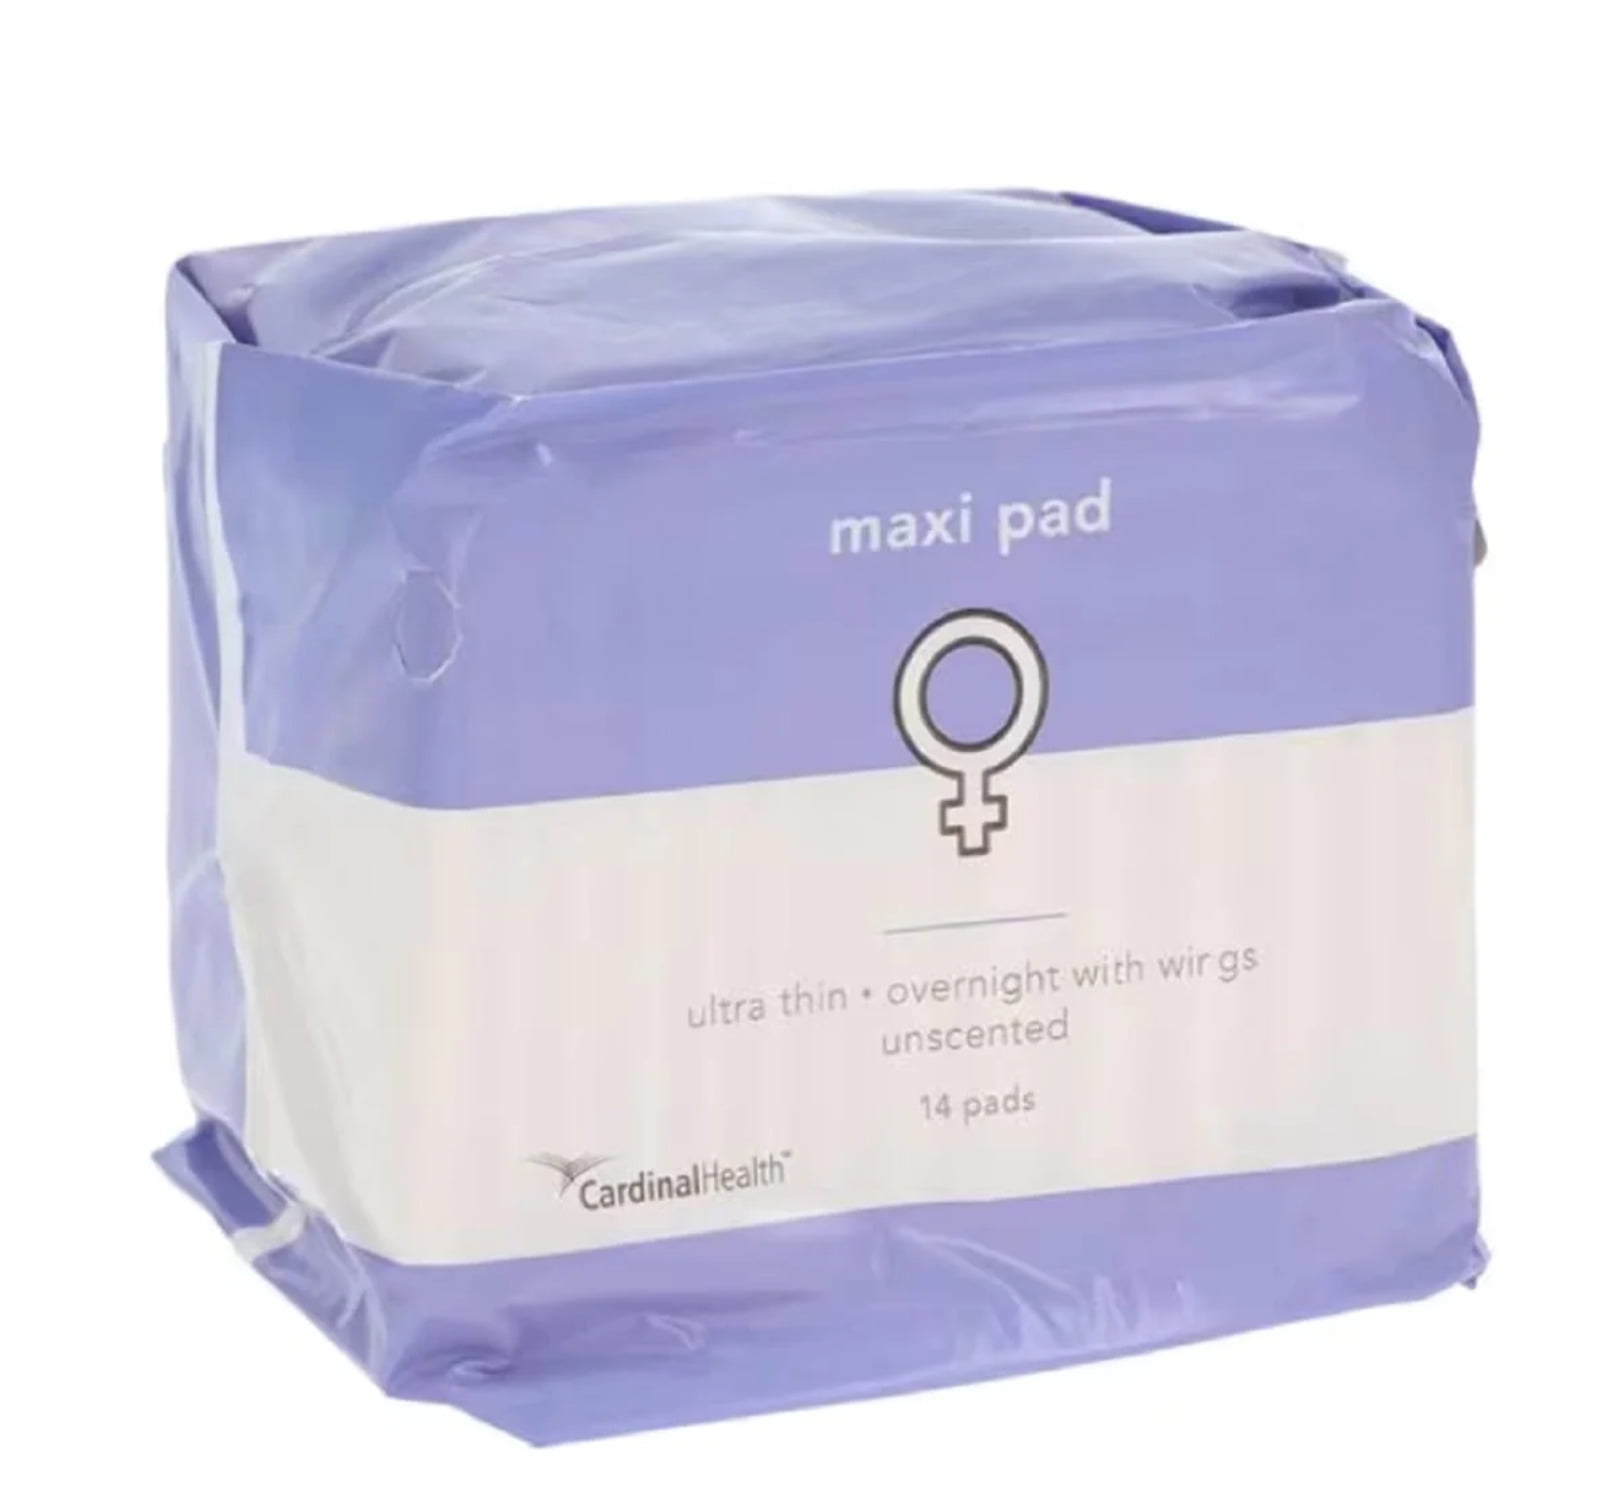  MED PRIDE Postpartum Maternity Pads [12 Pads]- Extra